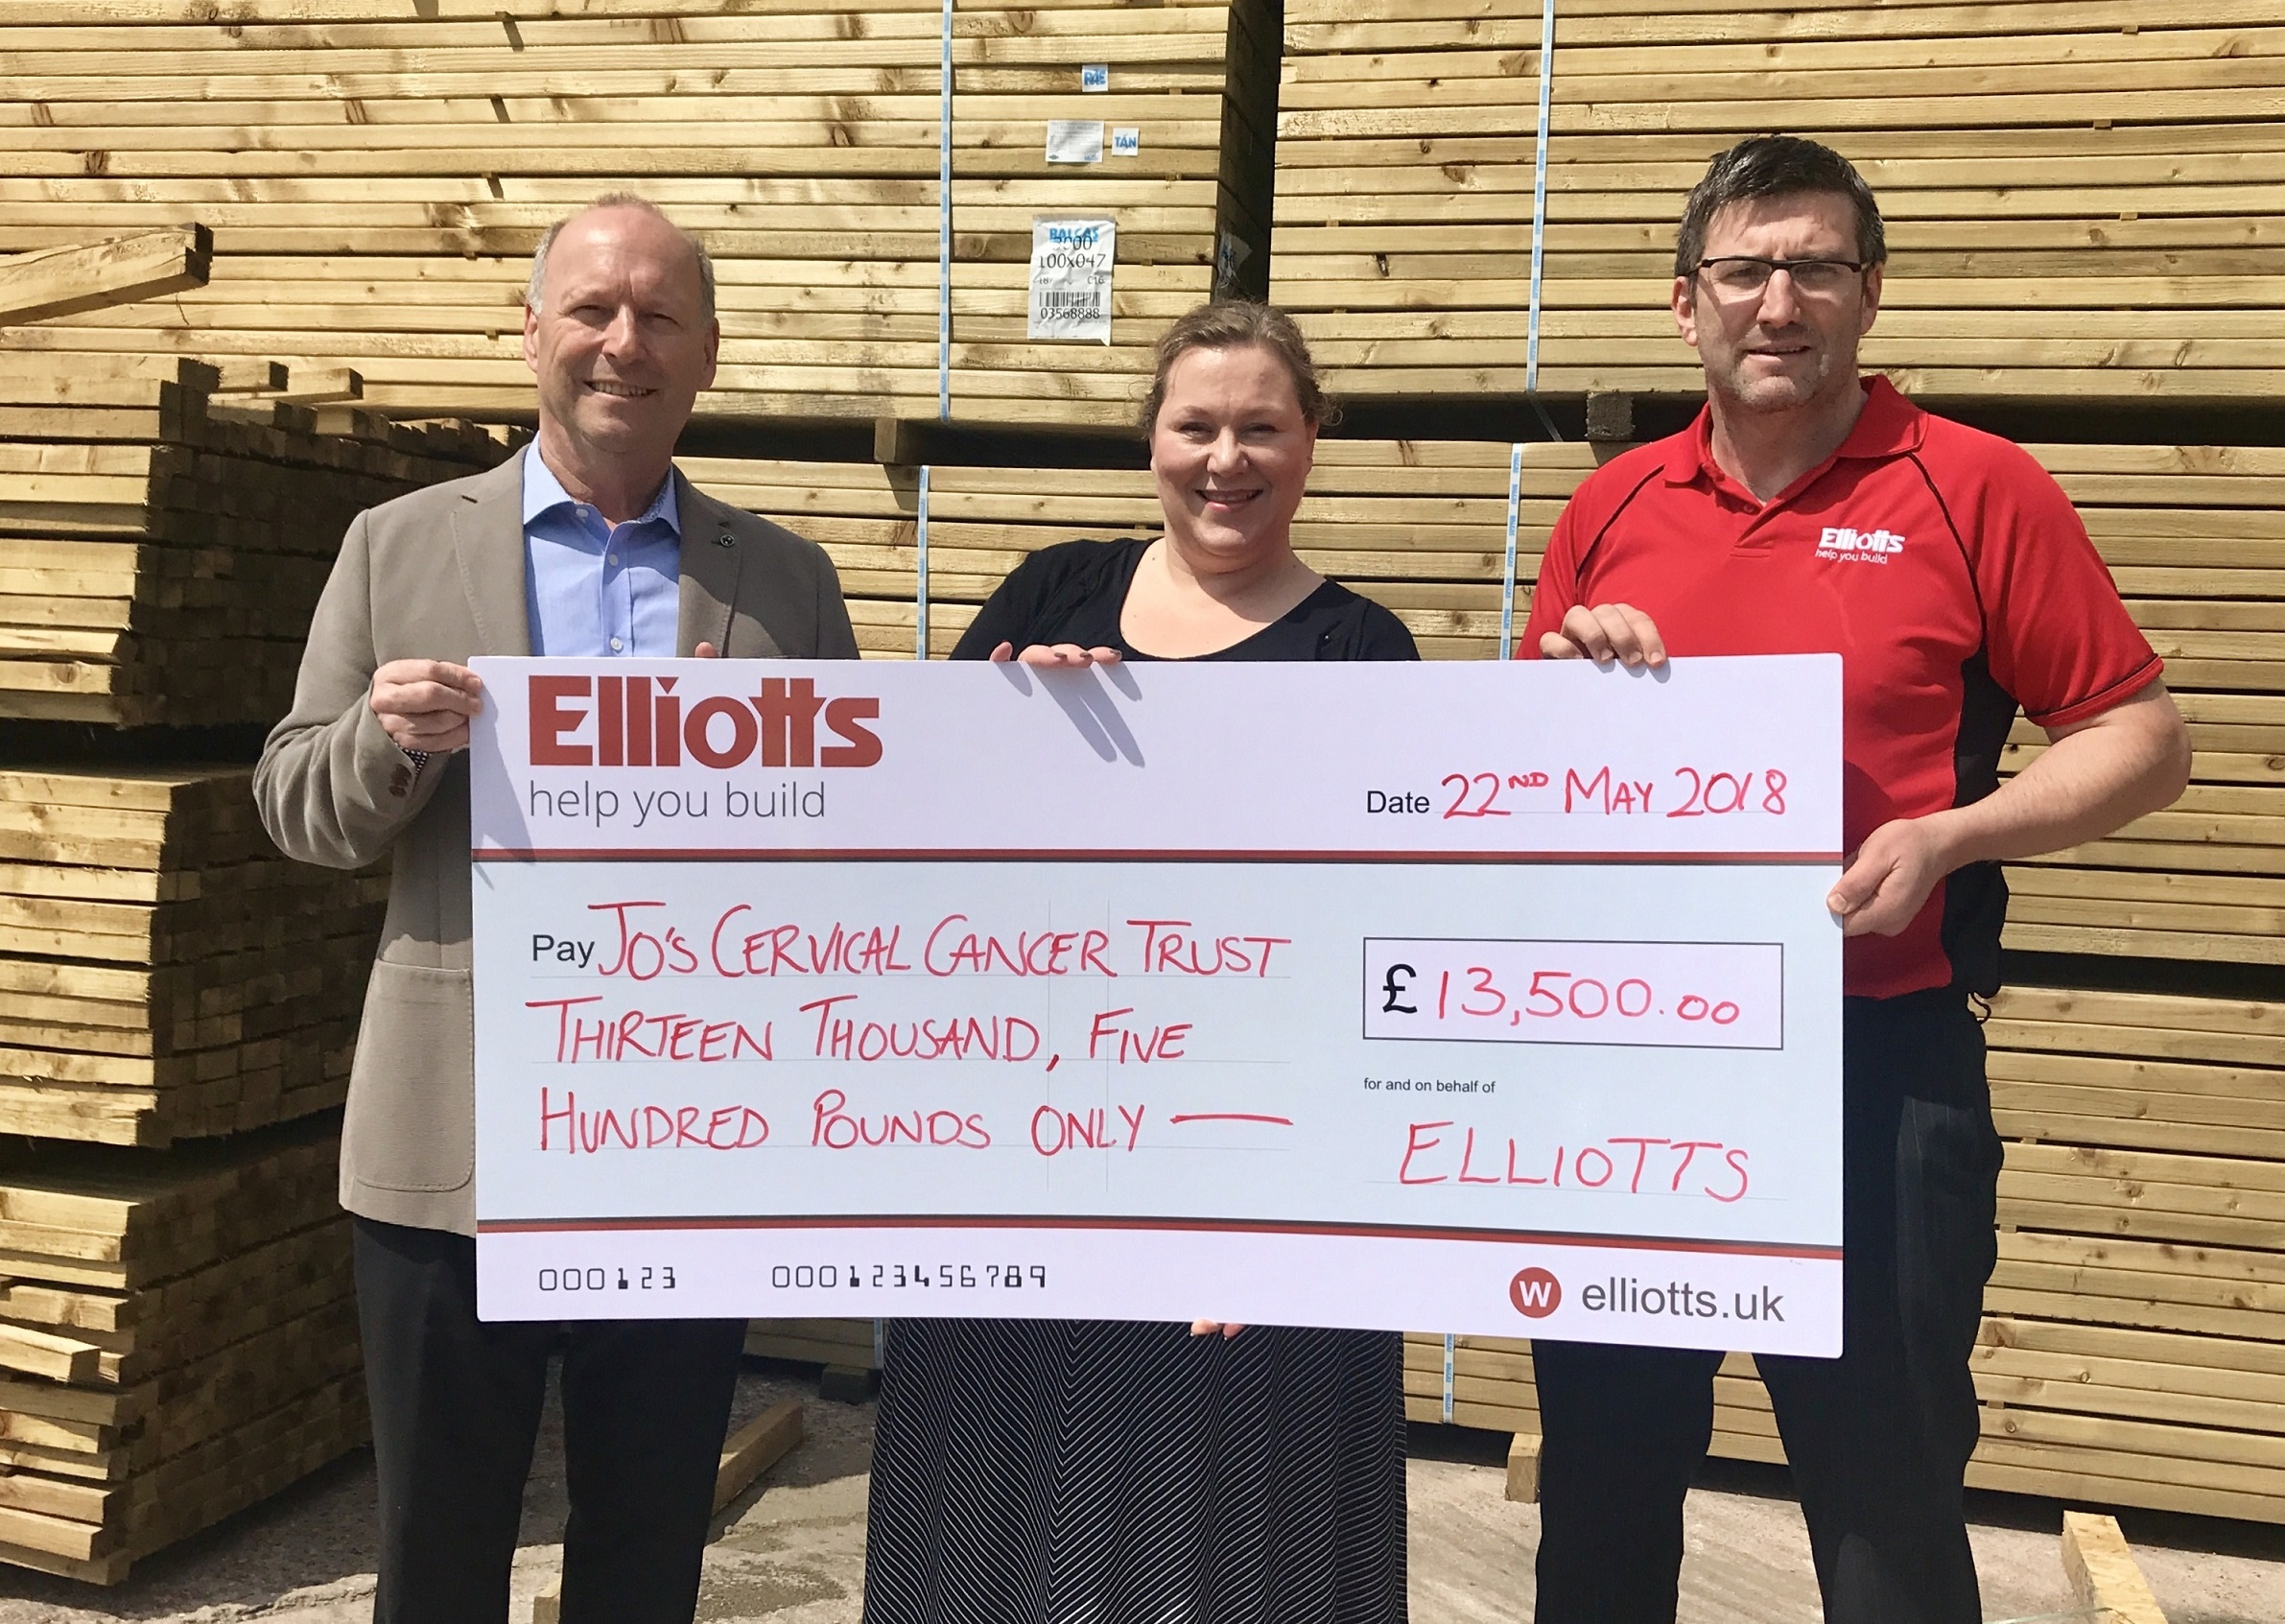 Stuart Mason-Elliott (left) and Ted Tugwell (right) present the cheque for £13,500 to Jo’s Cervical Cancer Trust’s Head of Fundraising, Emilia Carman